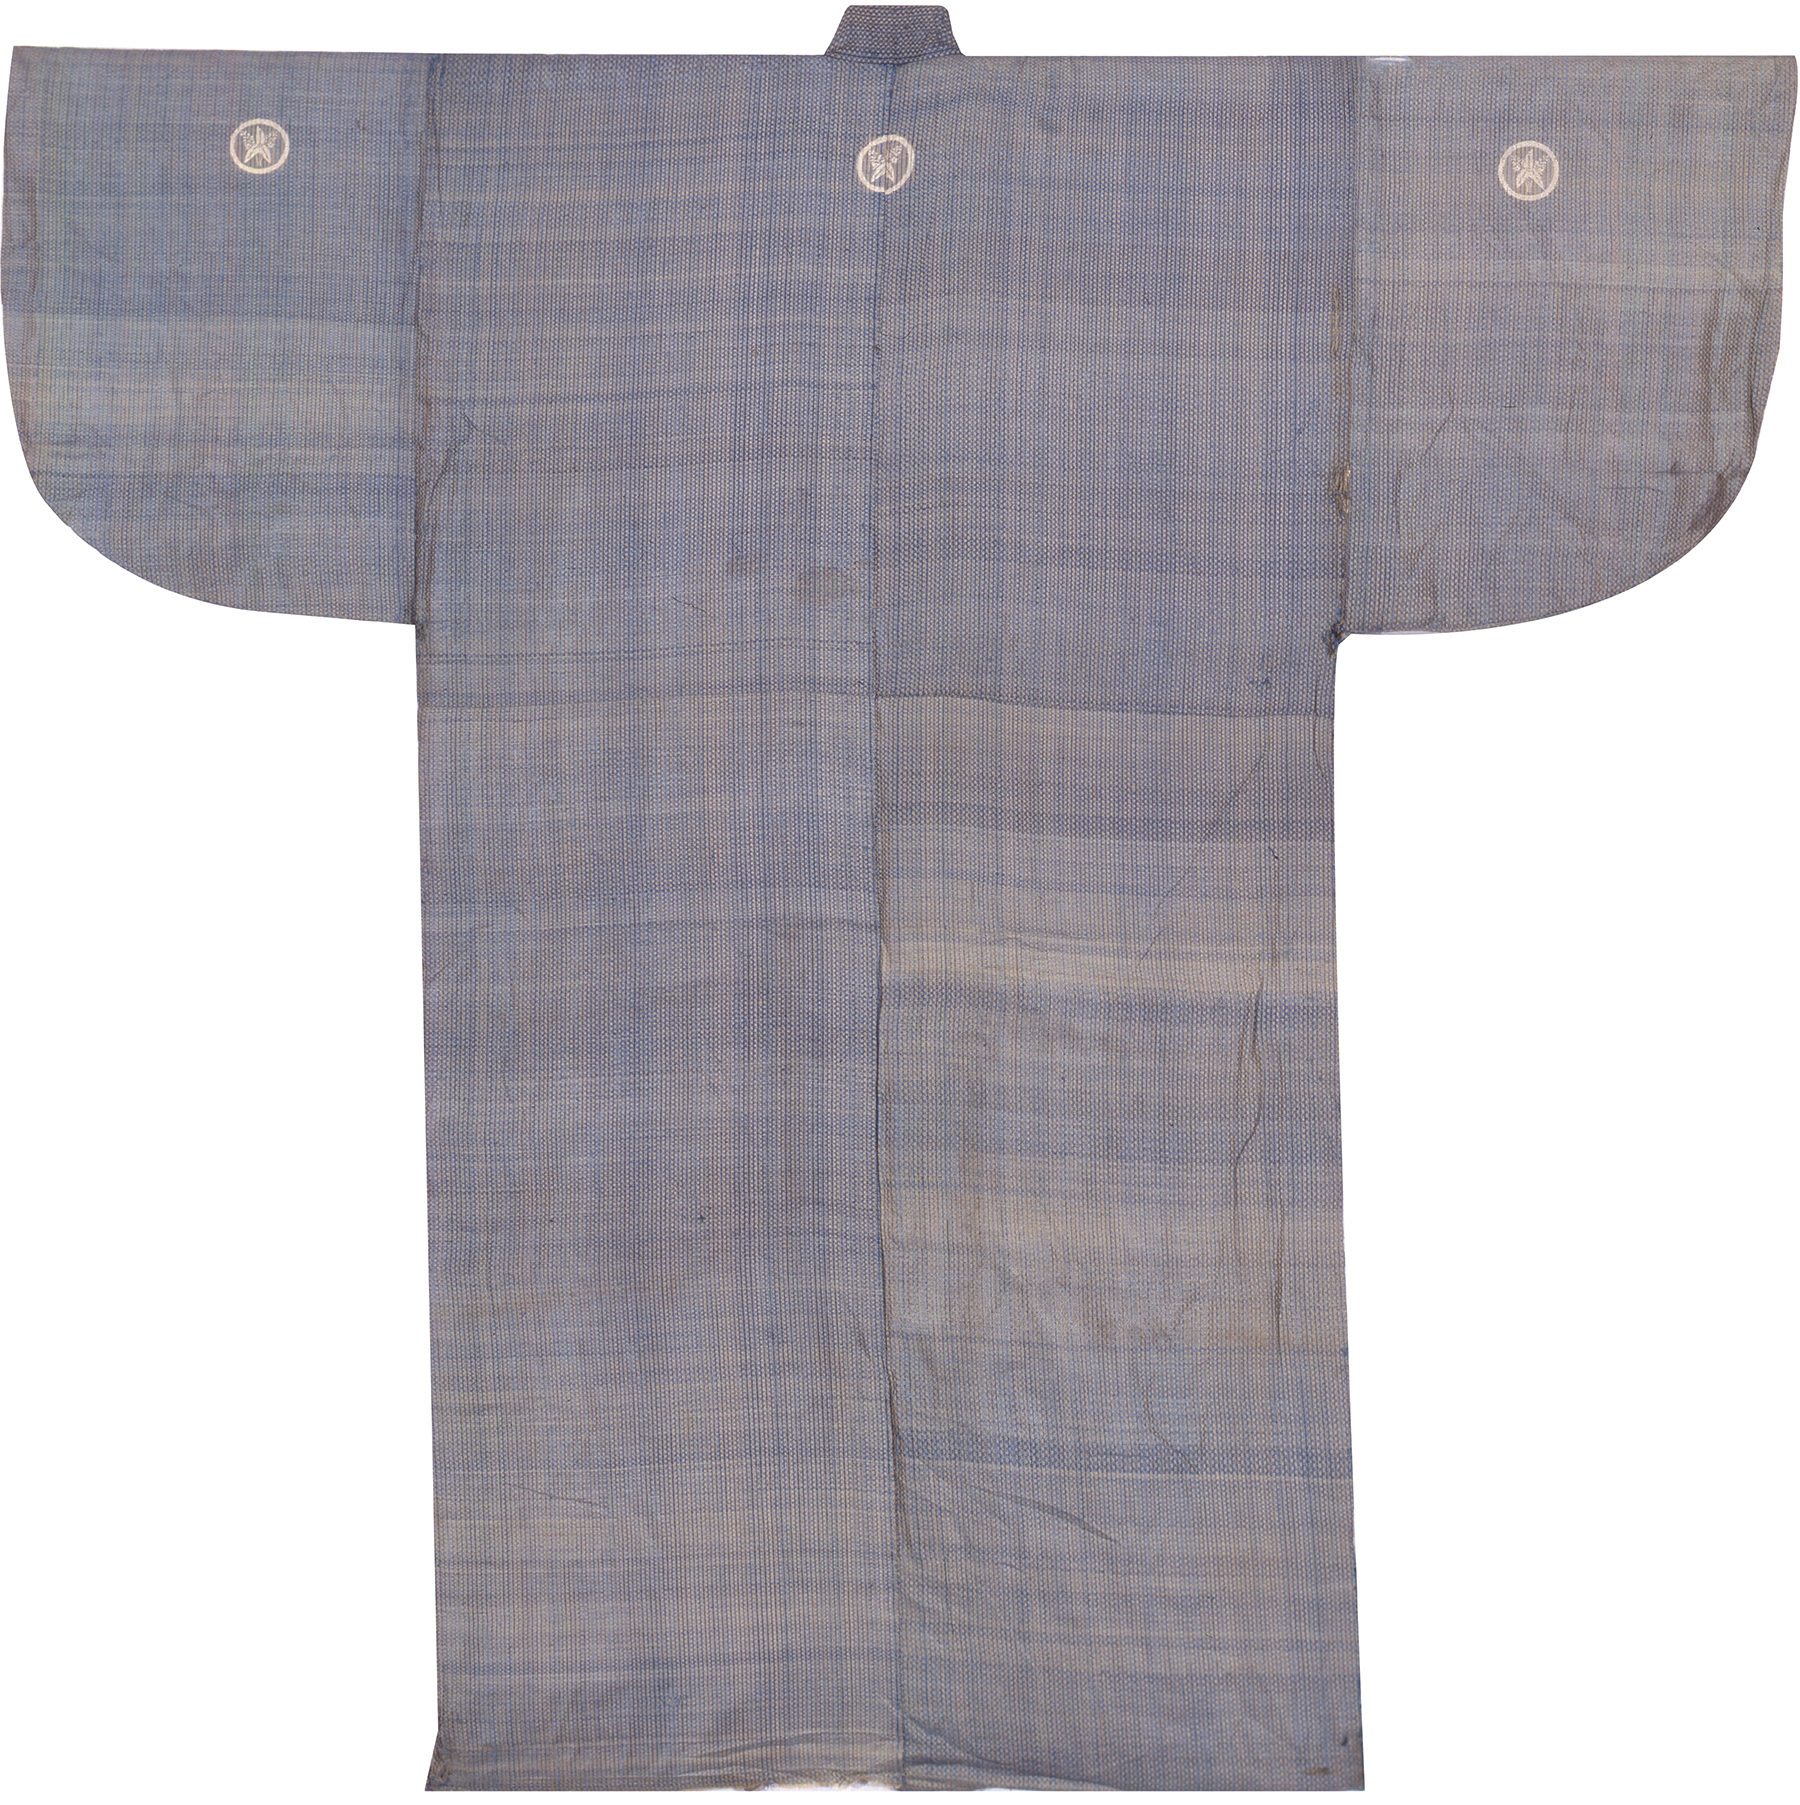 Kosode (a type of kimono) made of yellow and light navy-striped fabric with Japanese crests of water plantain